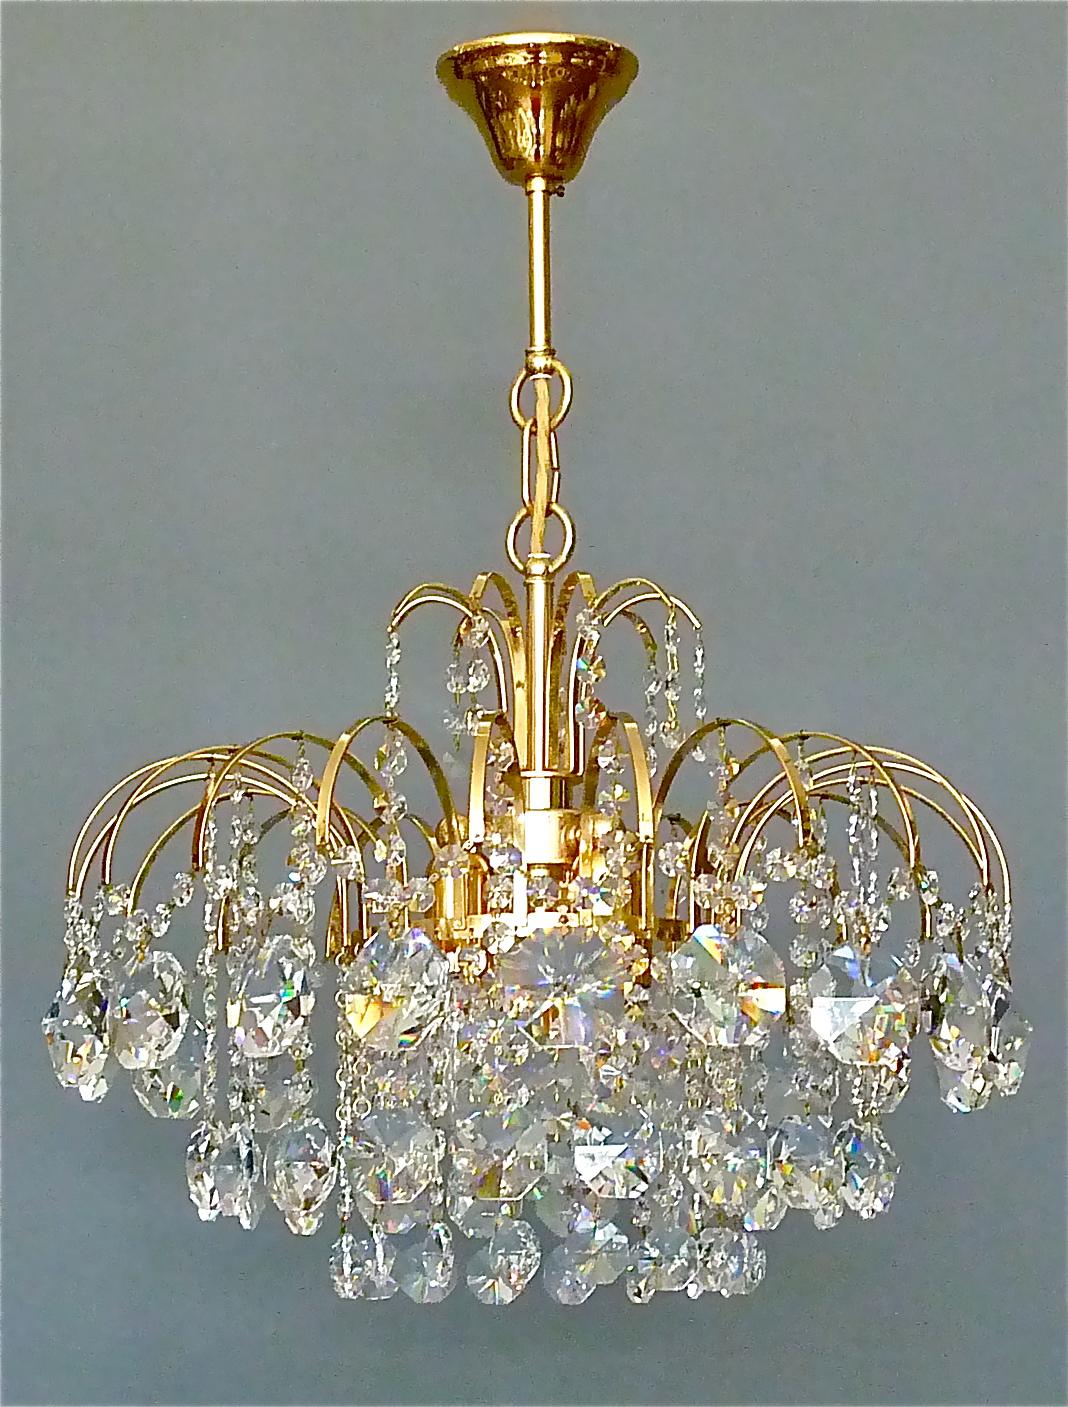 Precious gilt brass and crystal glass Sputnik chandelier made by Christoph Palme or Palwa, Germany, circa 1960-1970. The chain-hanging chandelier has a gilt brass metal Sputnik construction with lots of high lead hand-cut faceted octagonal crystal